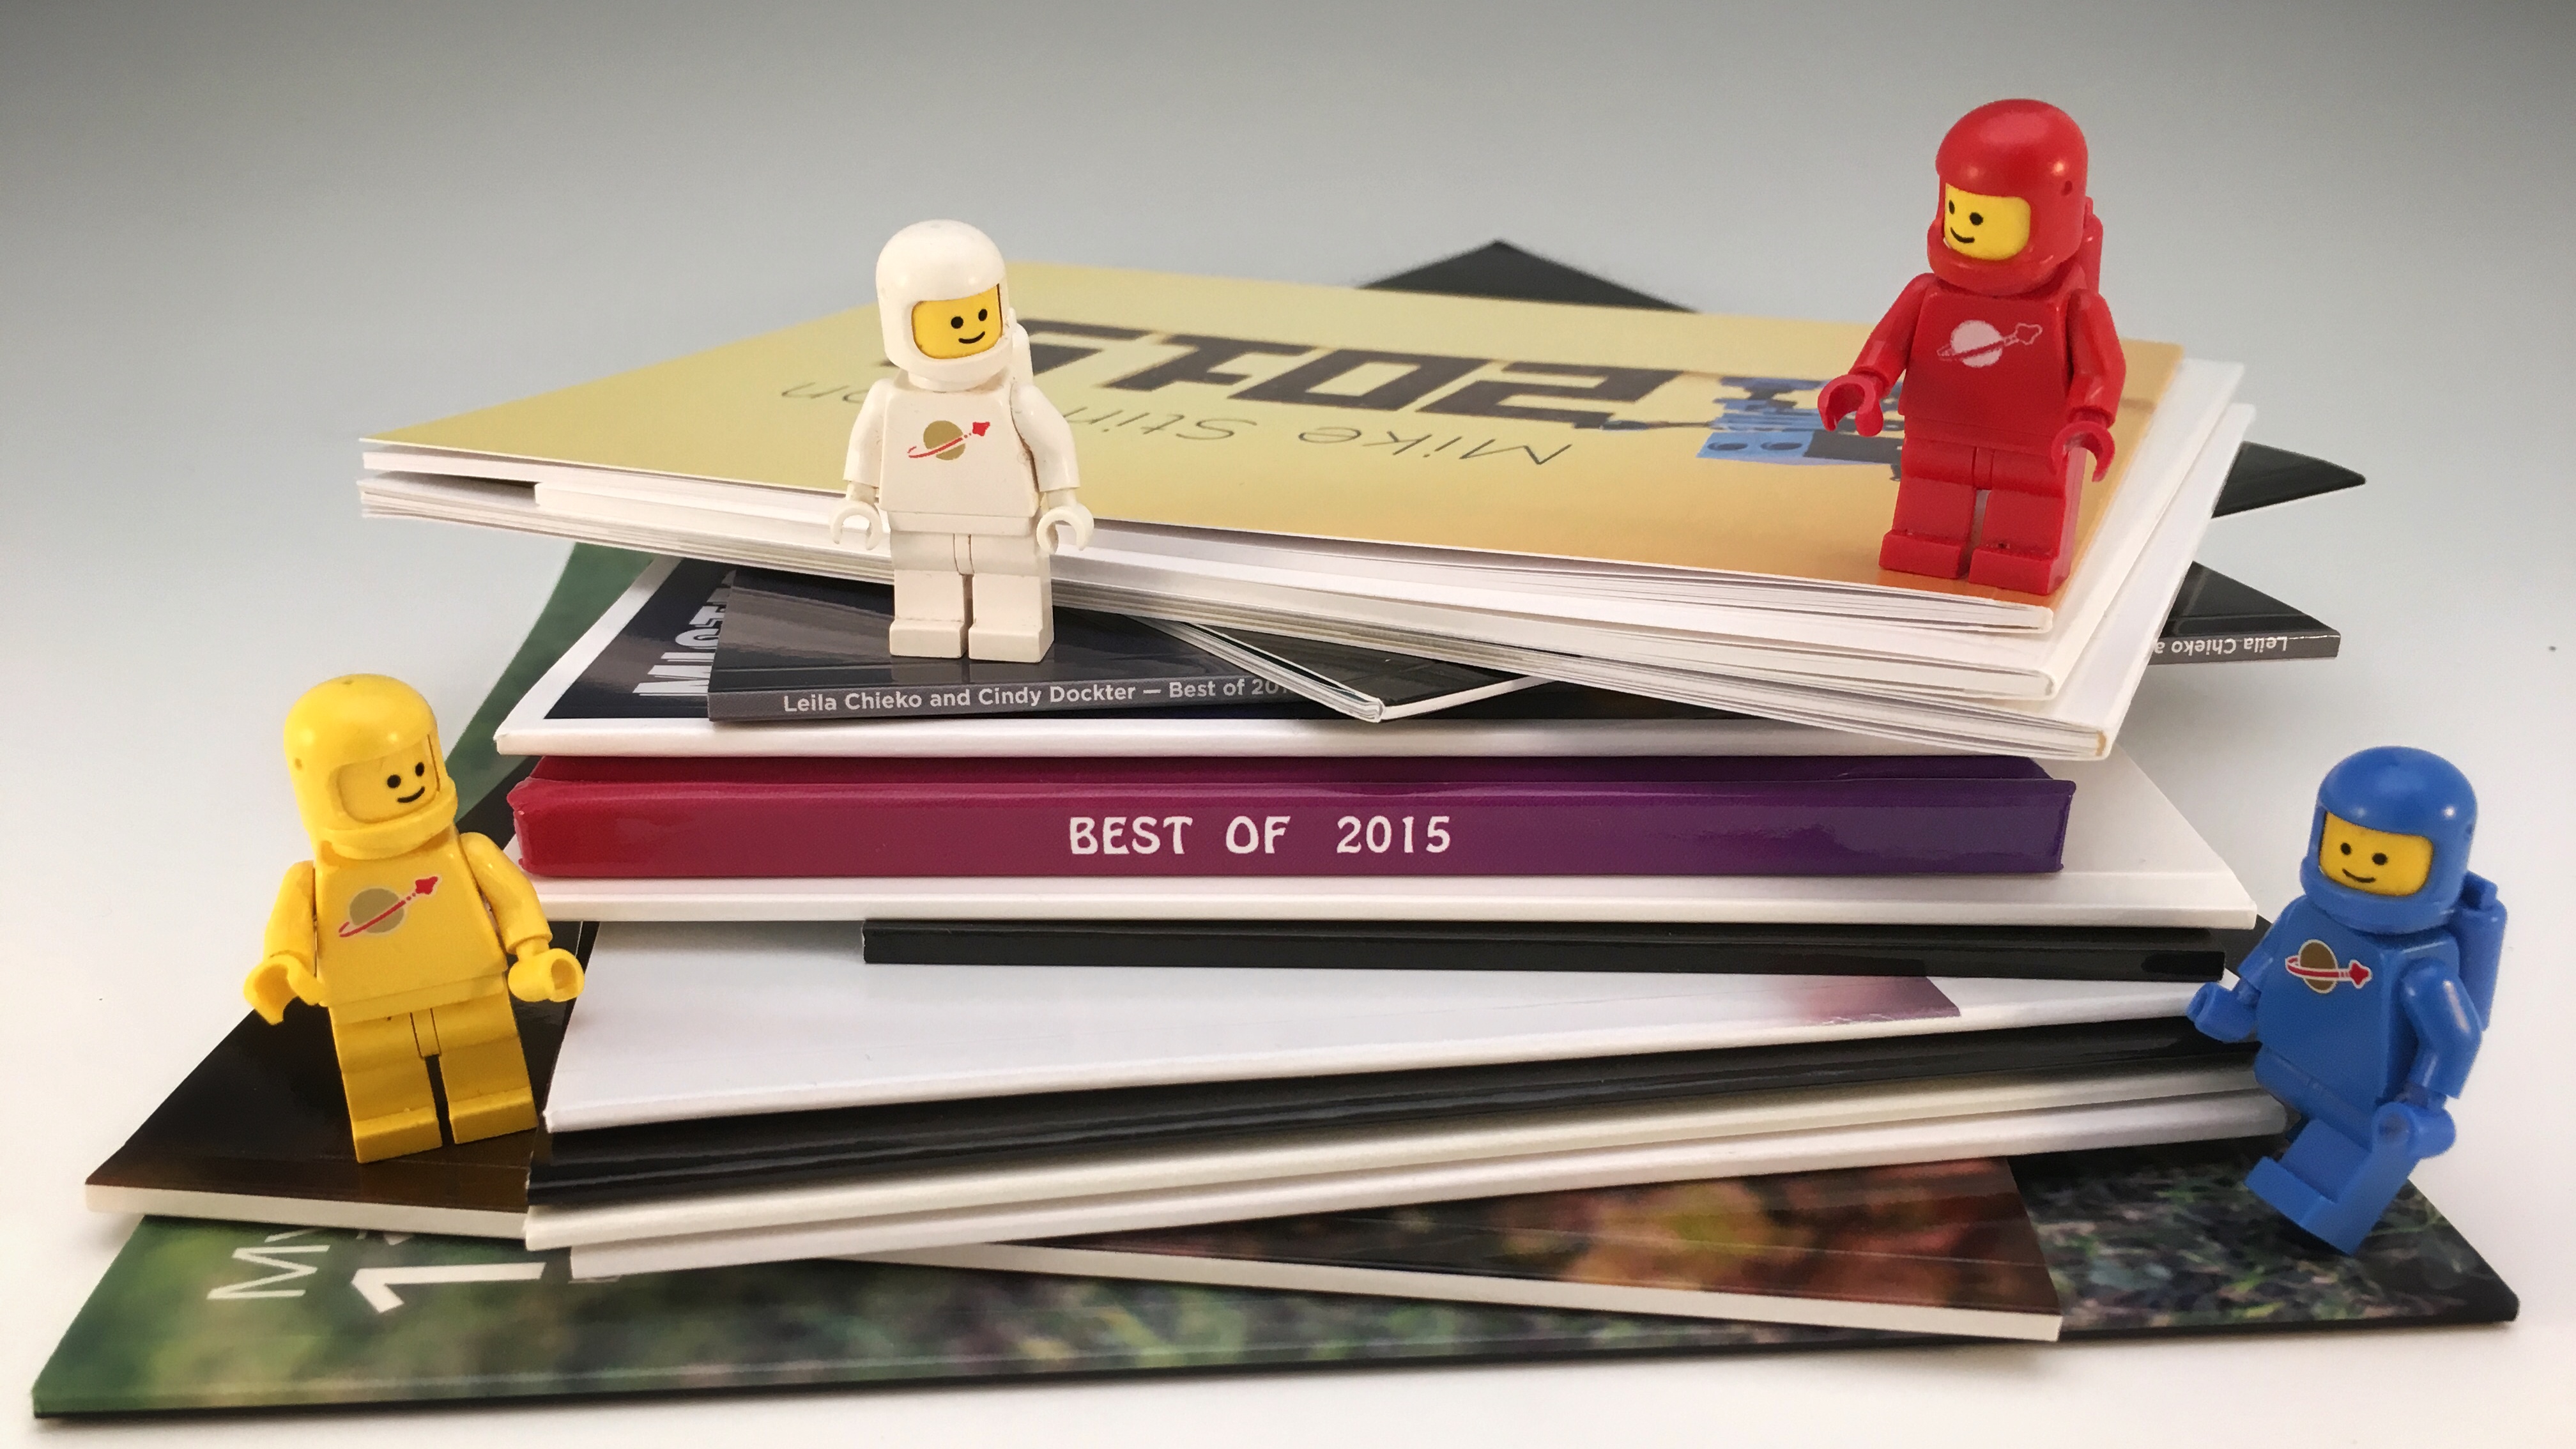 15 toy photography books in a short stack with four classic lego spacemen.